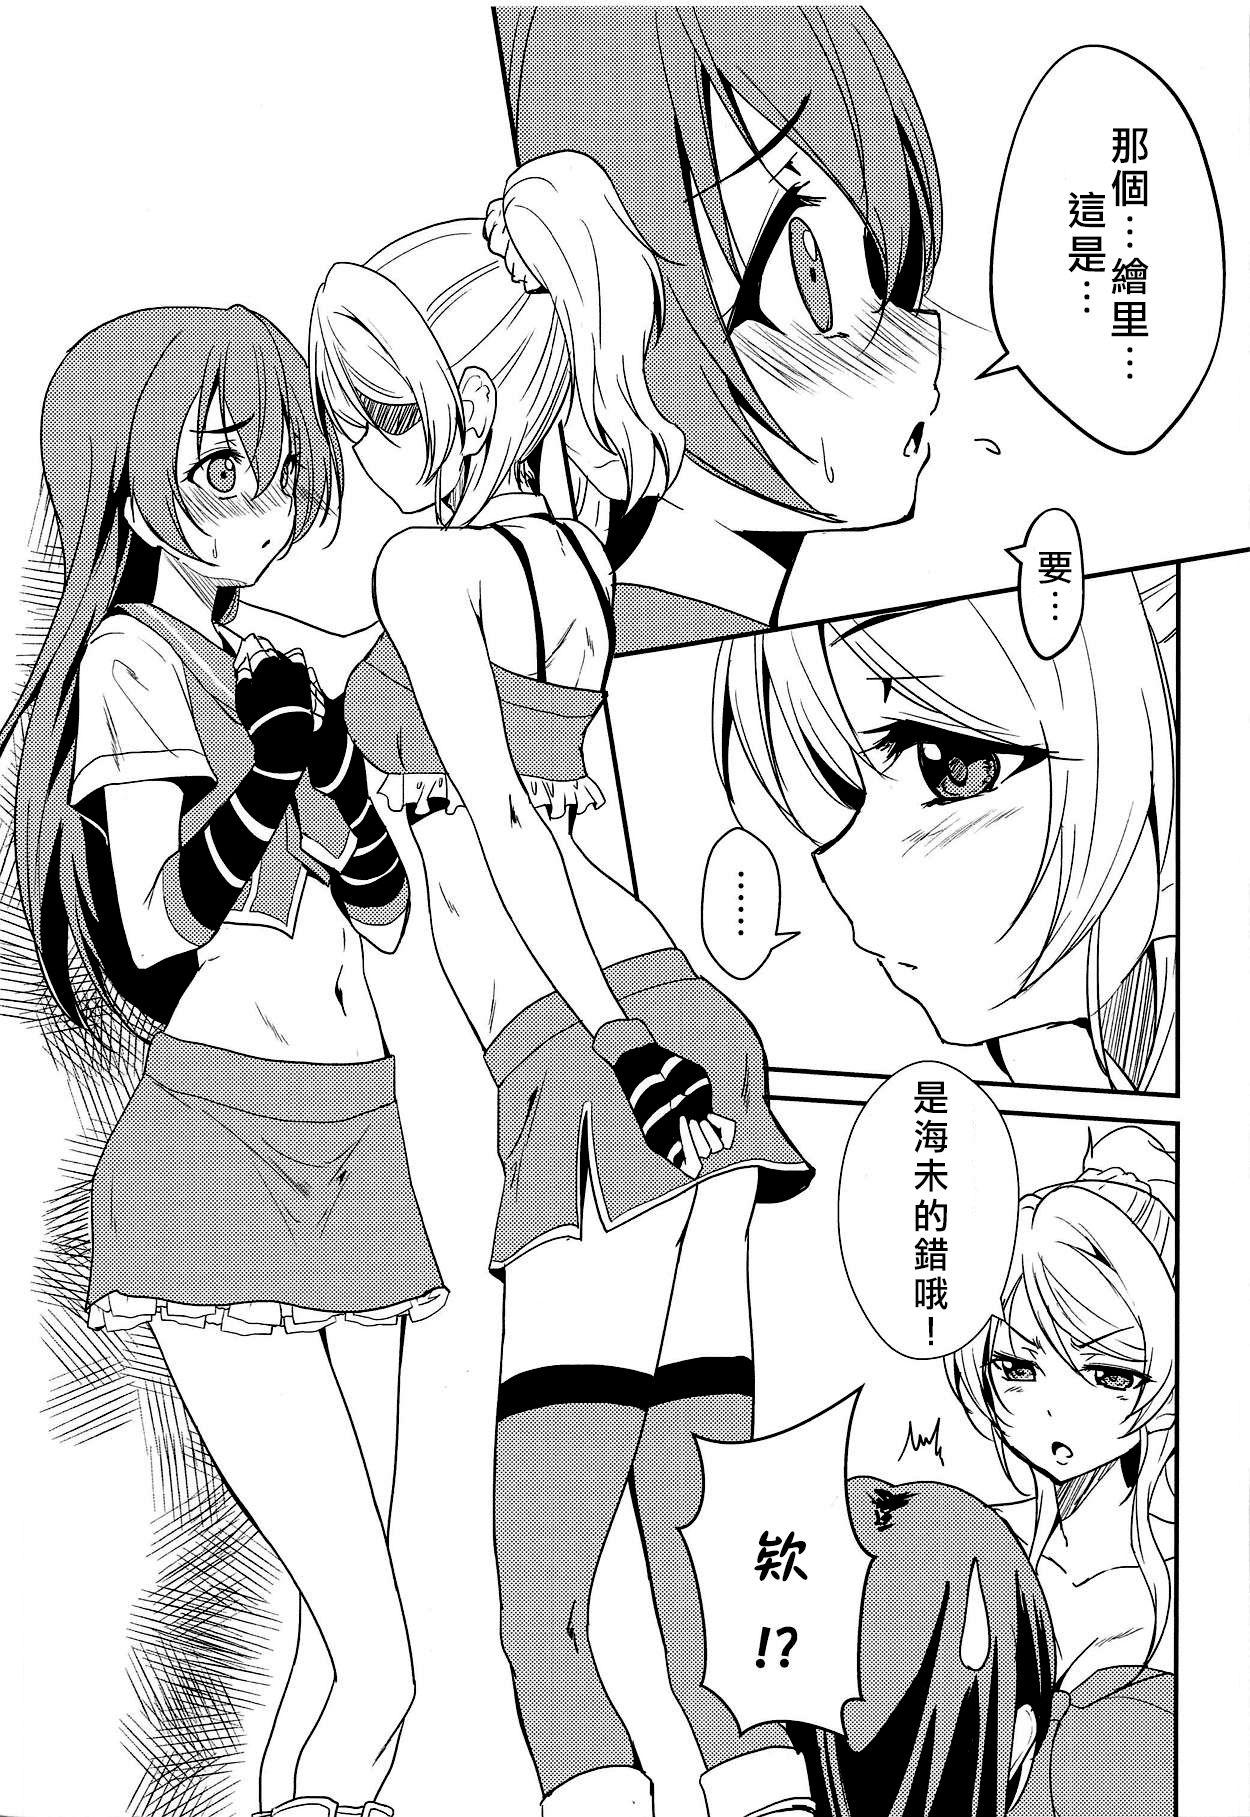 Load BLUE EXTASY - Love live Dutch - Page 3